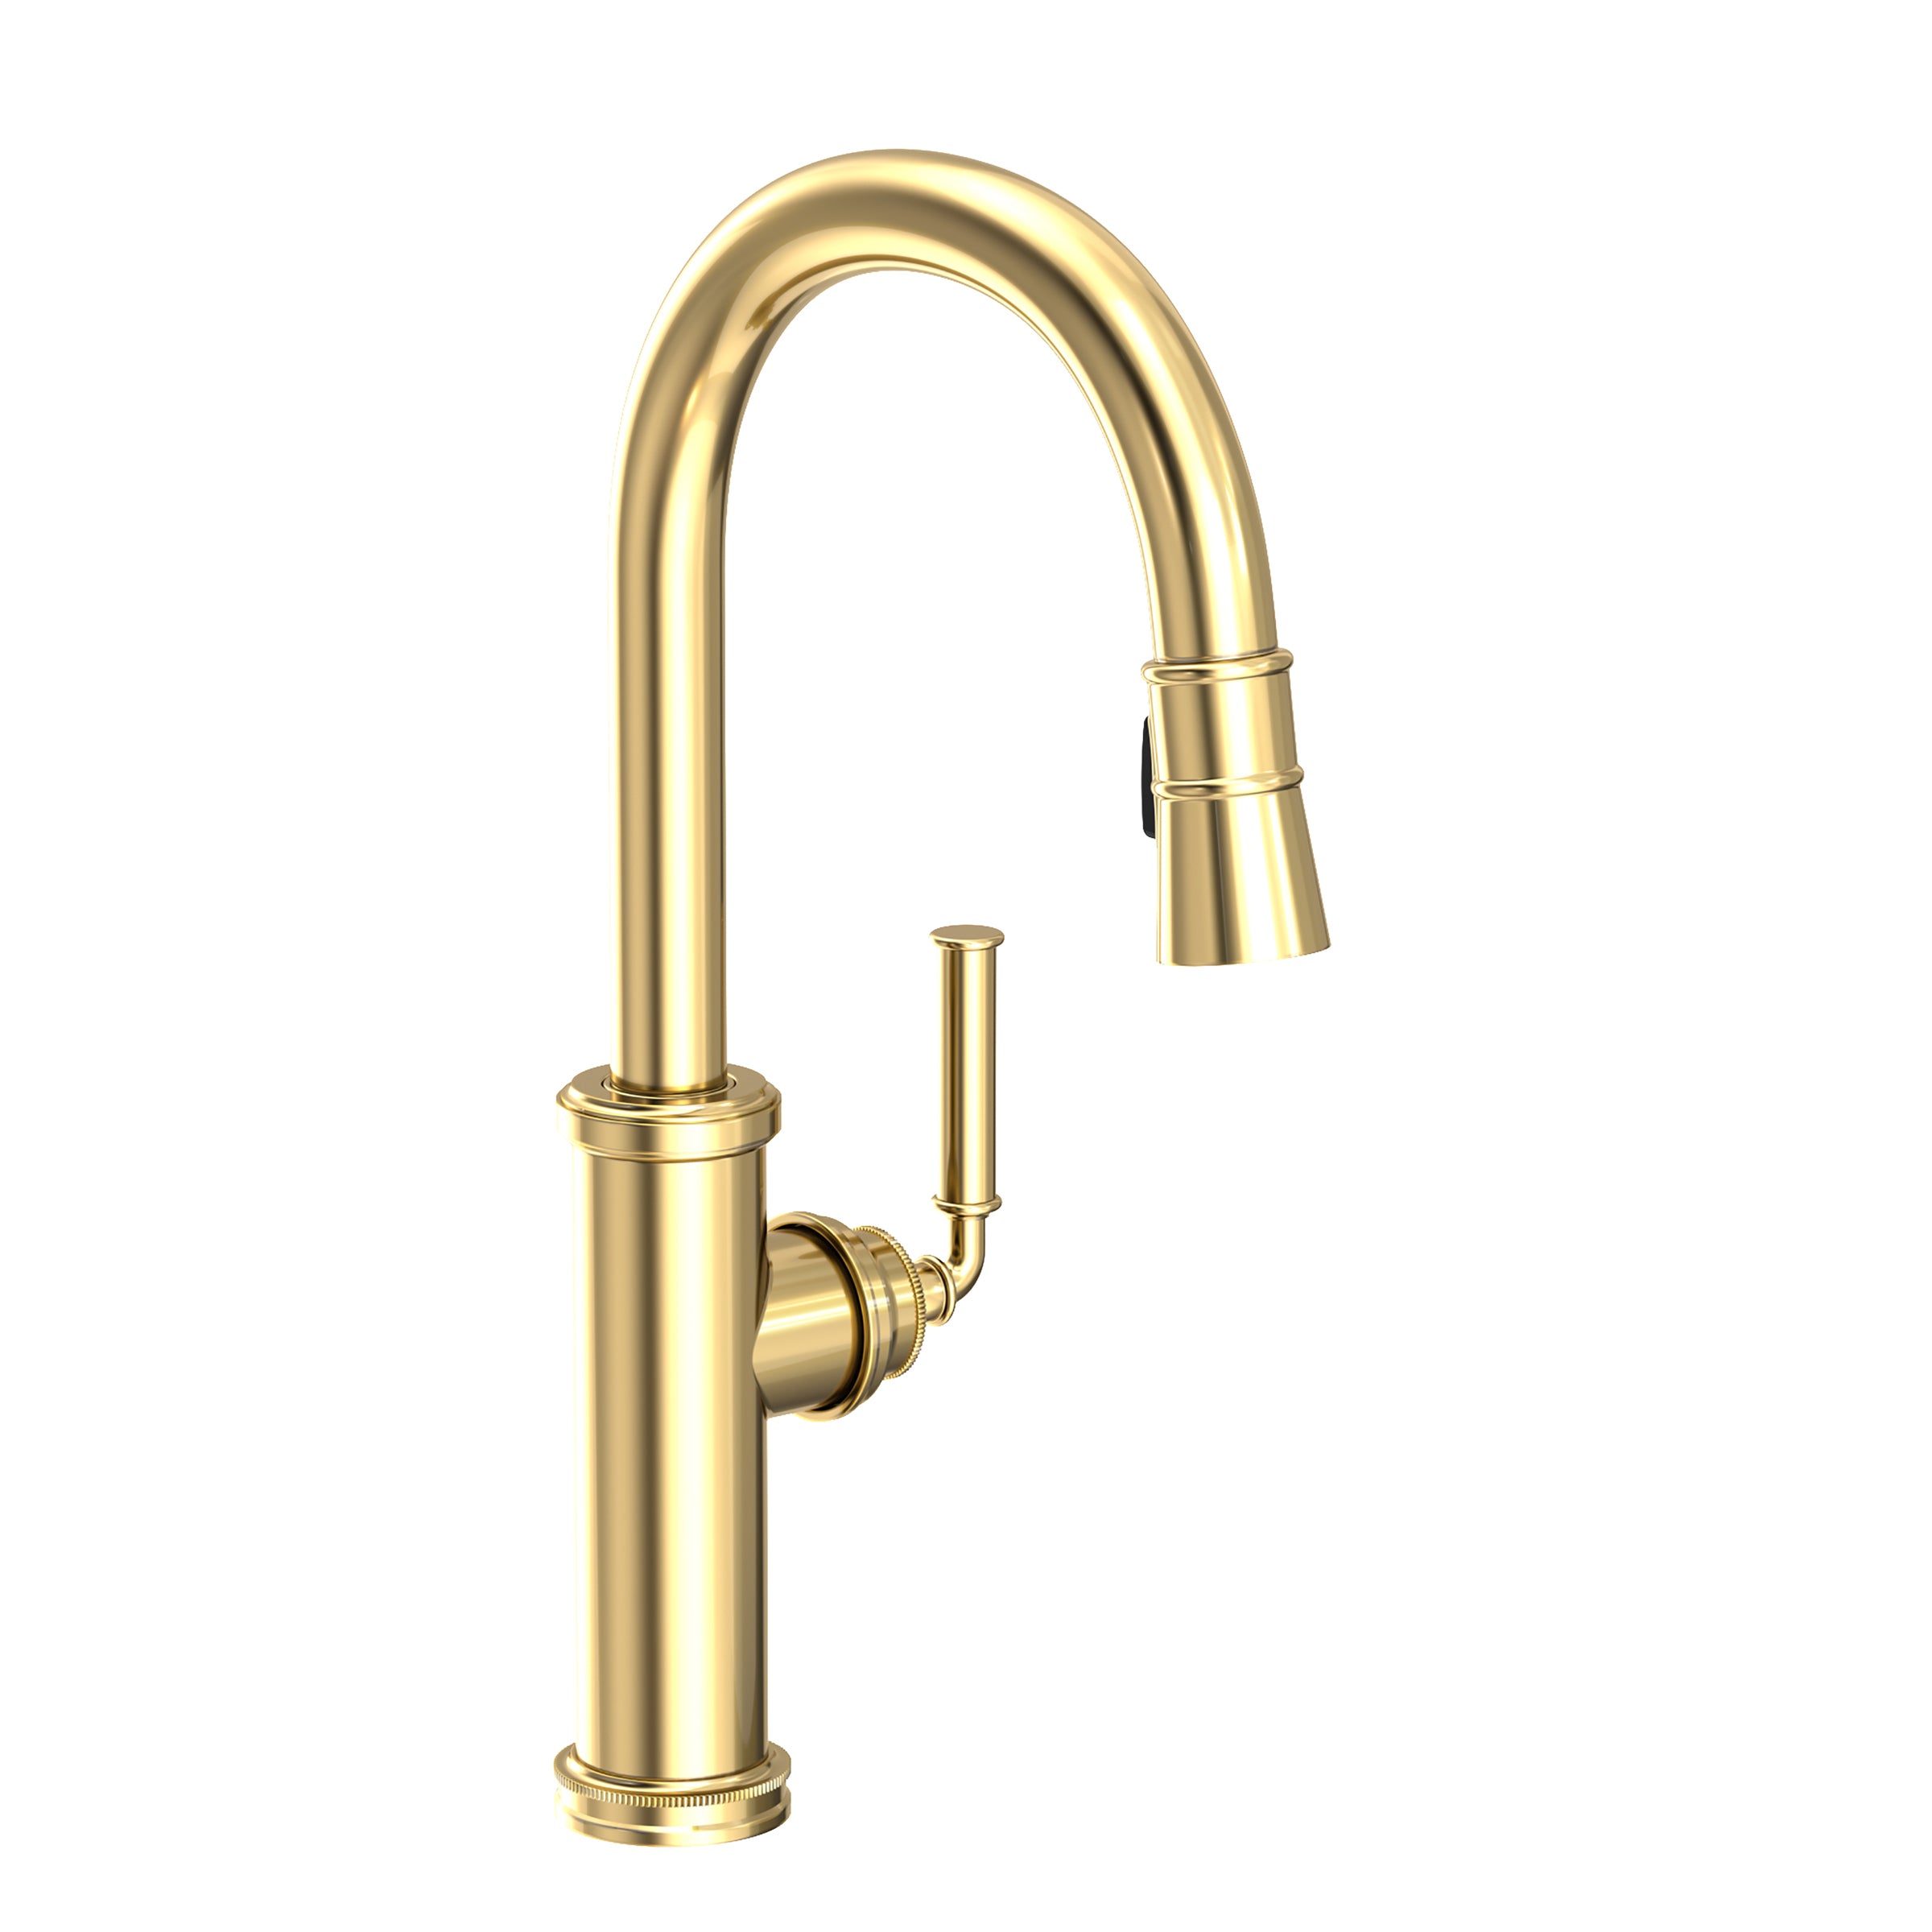 Thermo Rd Plt Asm in Antique Brass